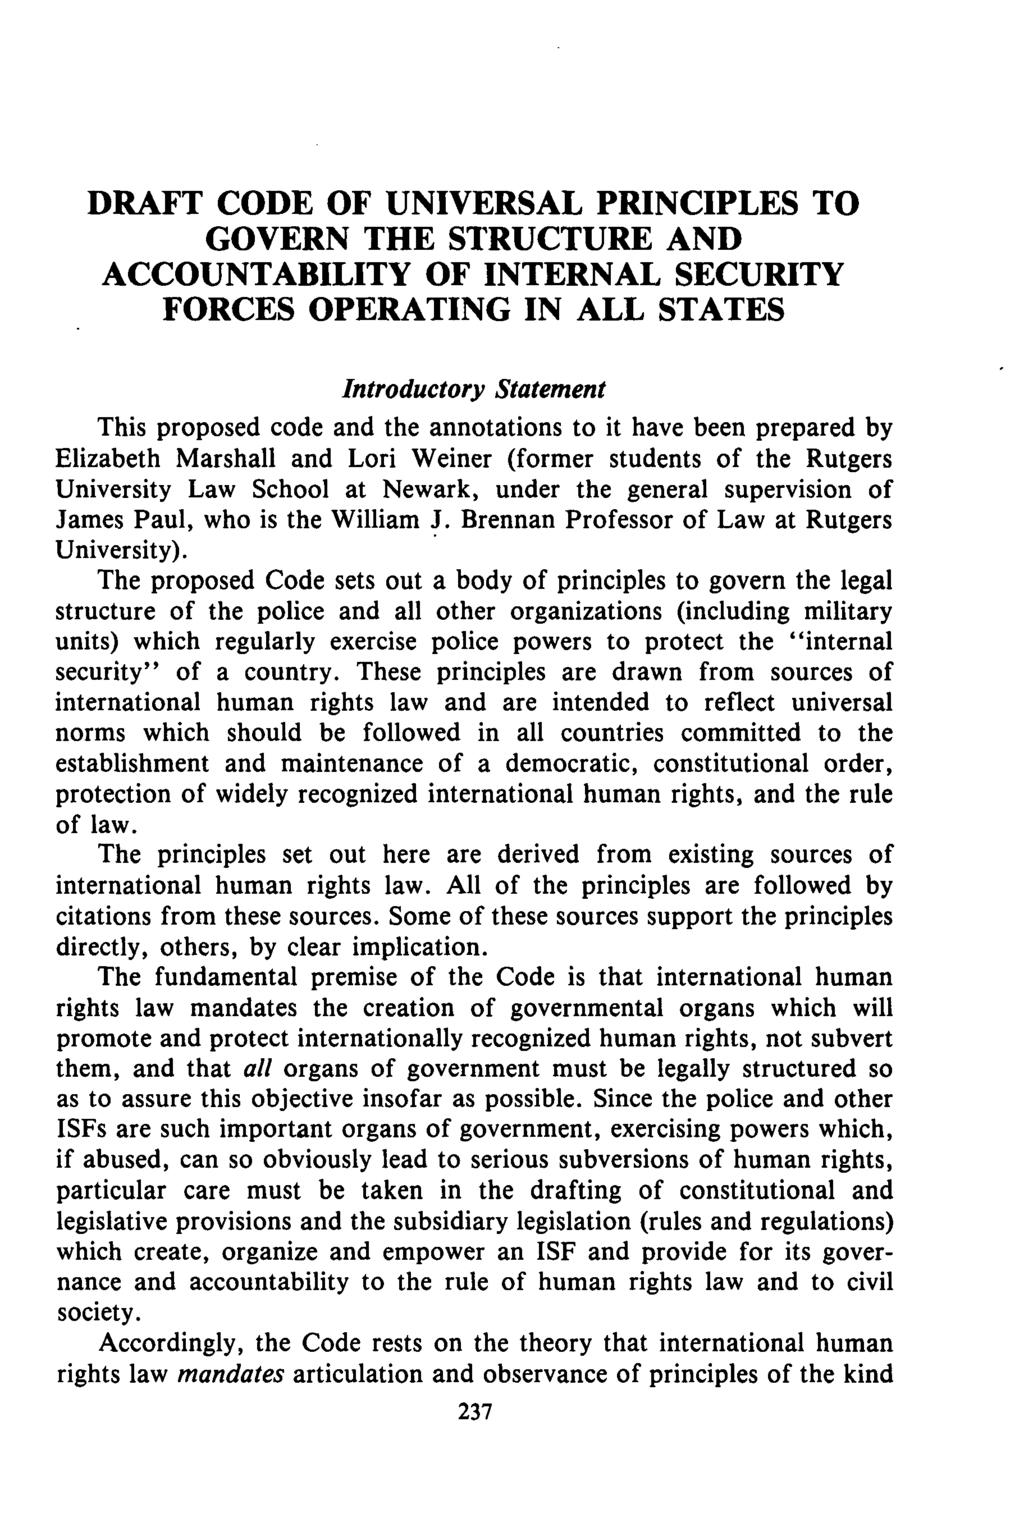 DRAFT CODE OF UNIVERSAL PRINCIPLES TO GOVERN THE STRUCTURE AND ACCOUNTABILITY OF INTERNAL SECURITY FORCES OPERATING IN ALL STATES Introductory Statement This proposed code and the annotations to it